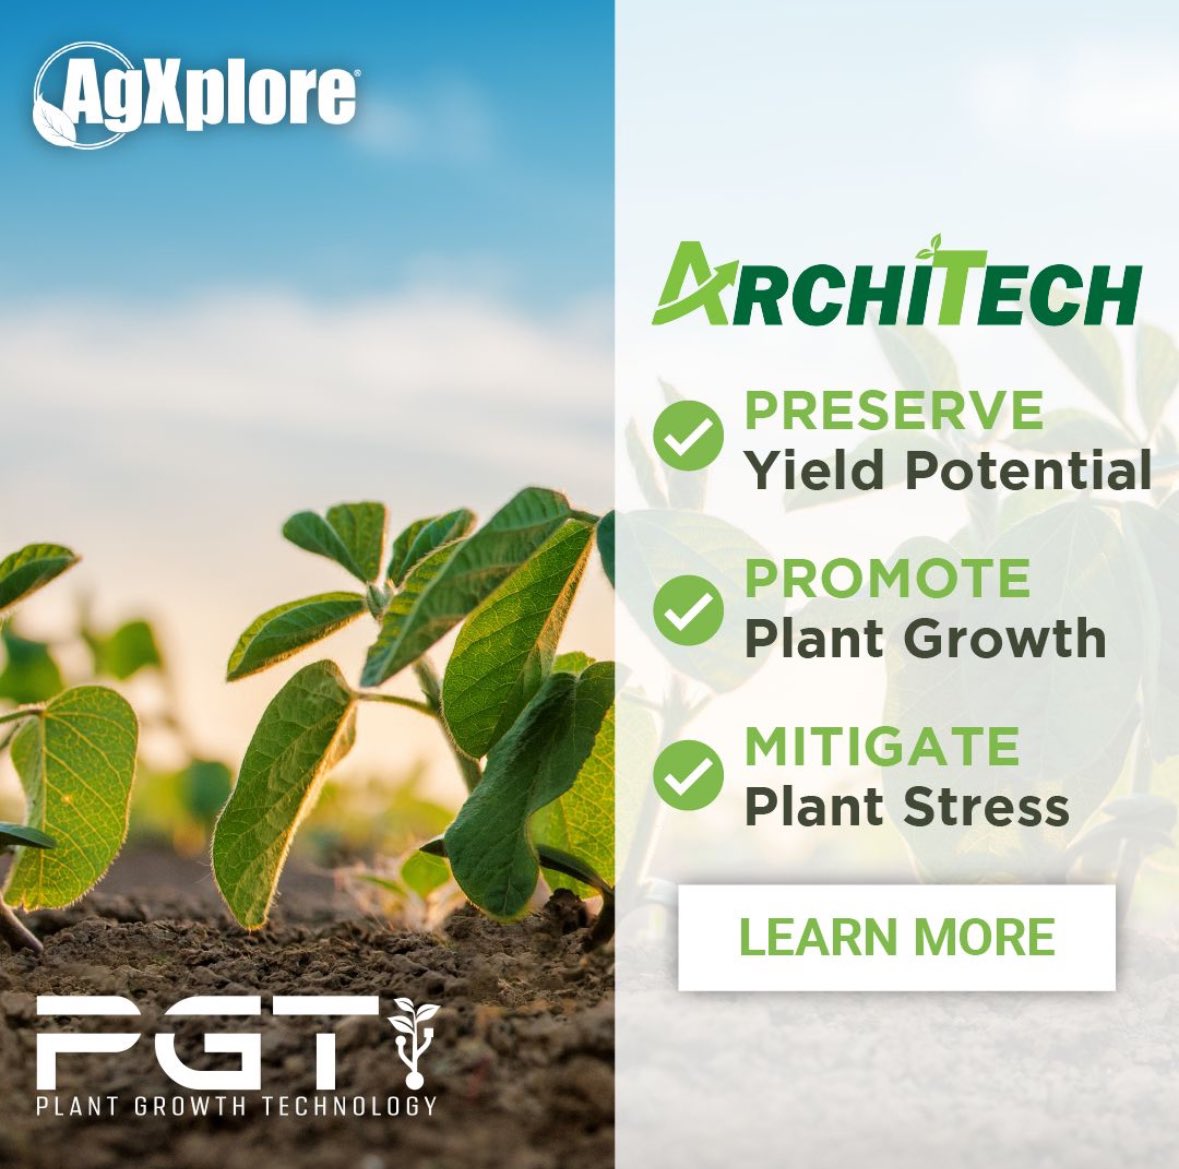 The #FIRSTEVER PGR and Plant Nutrition product in one. 

✅ Preserve Yield Potential 
✅ Promote Plant Growth
✅ Mitigate Plant Stress

Want to learn more? Join us on Tuesday, May 7th for Part 2 of our 5-Part Series, 'From The Field' #FTF Live on LinkedIn & YouTube.